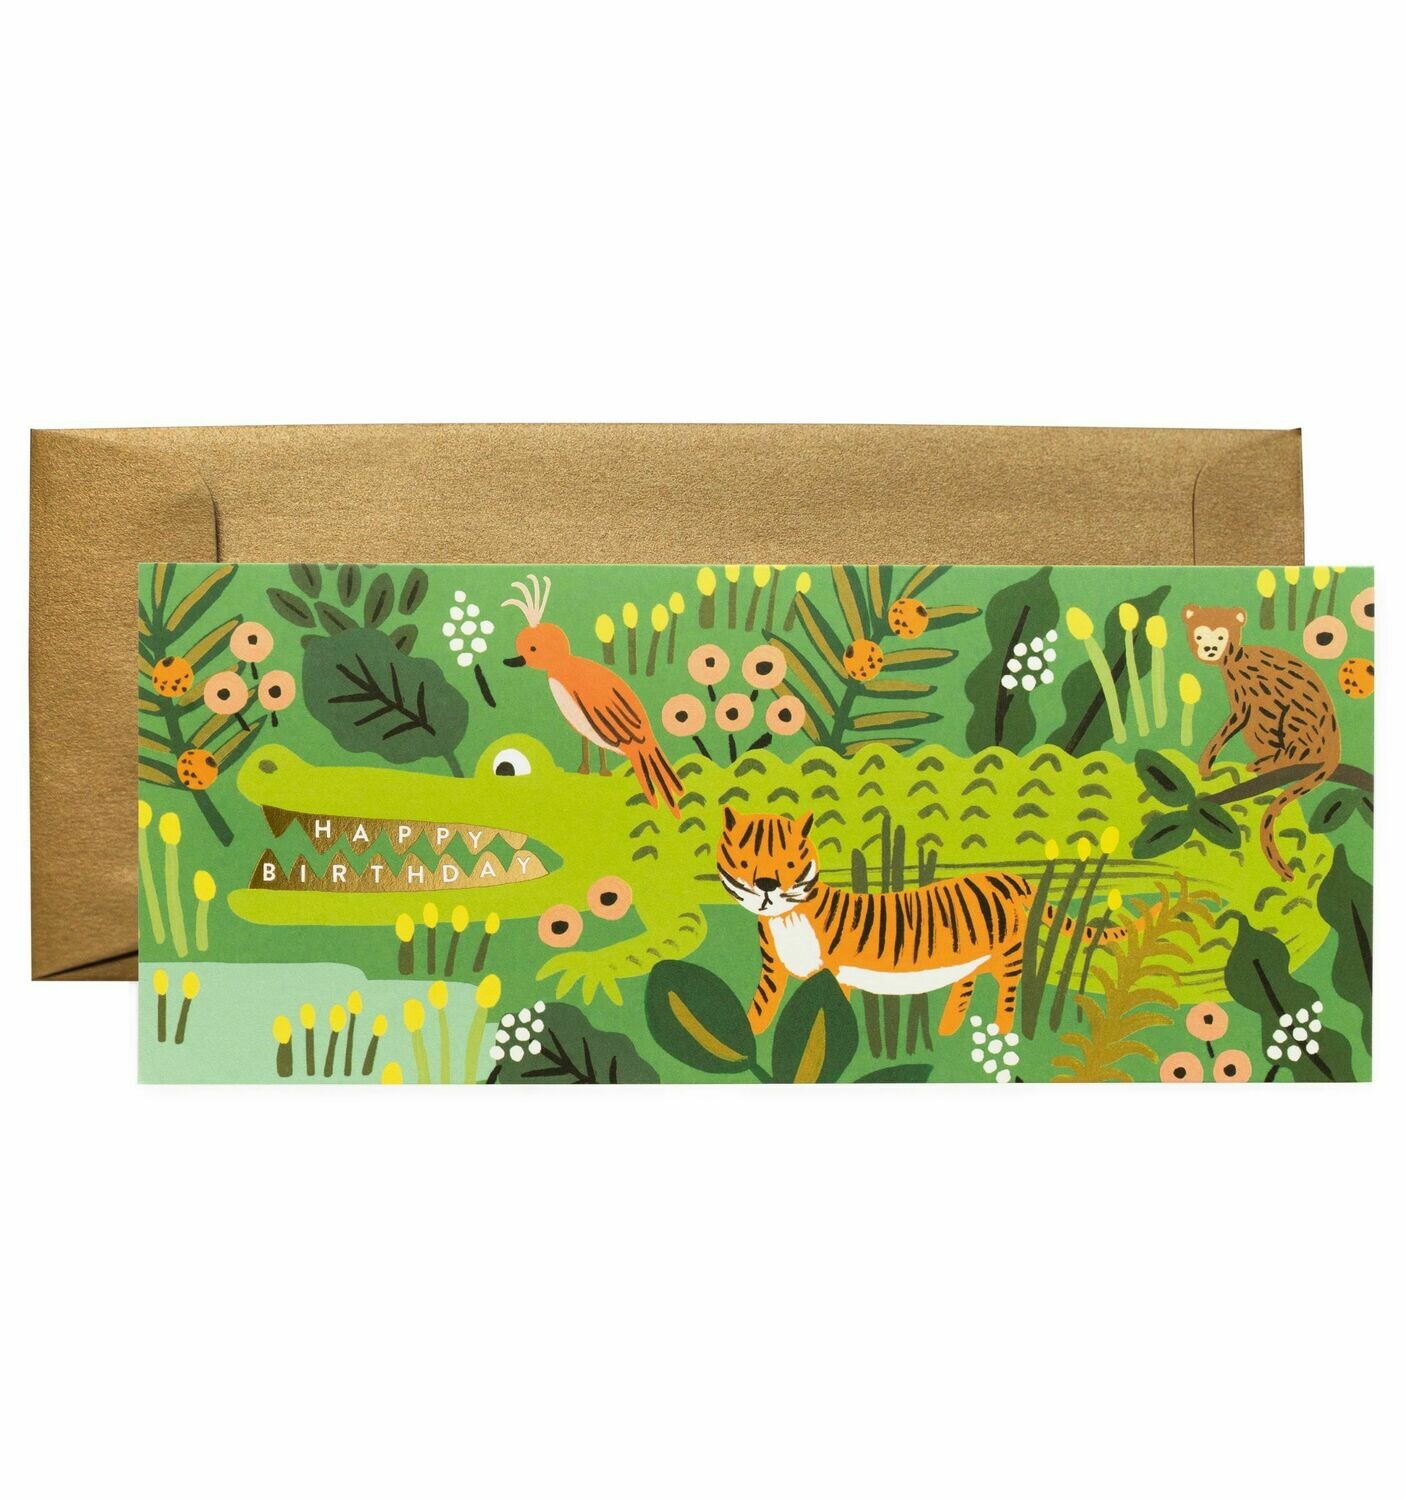 Alligator #10 Birthday Card - Rifle Paper Co. RPC113